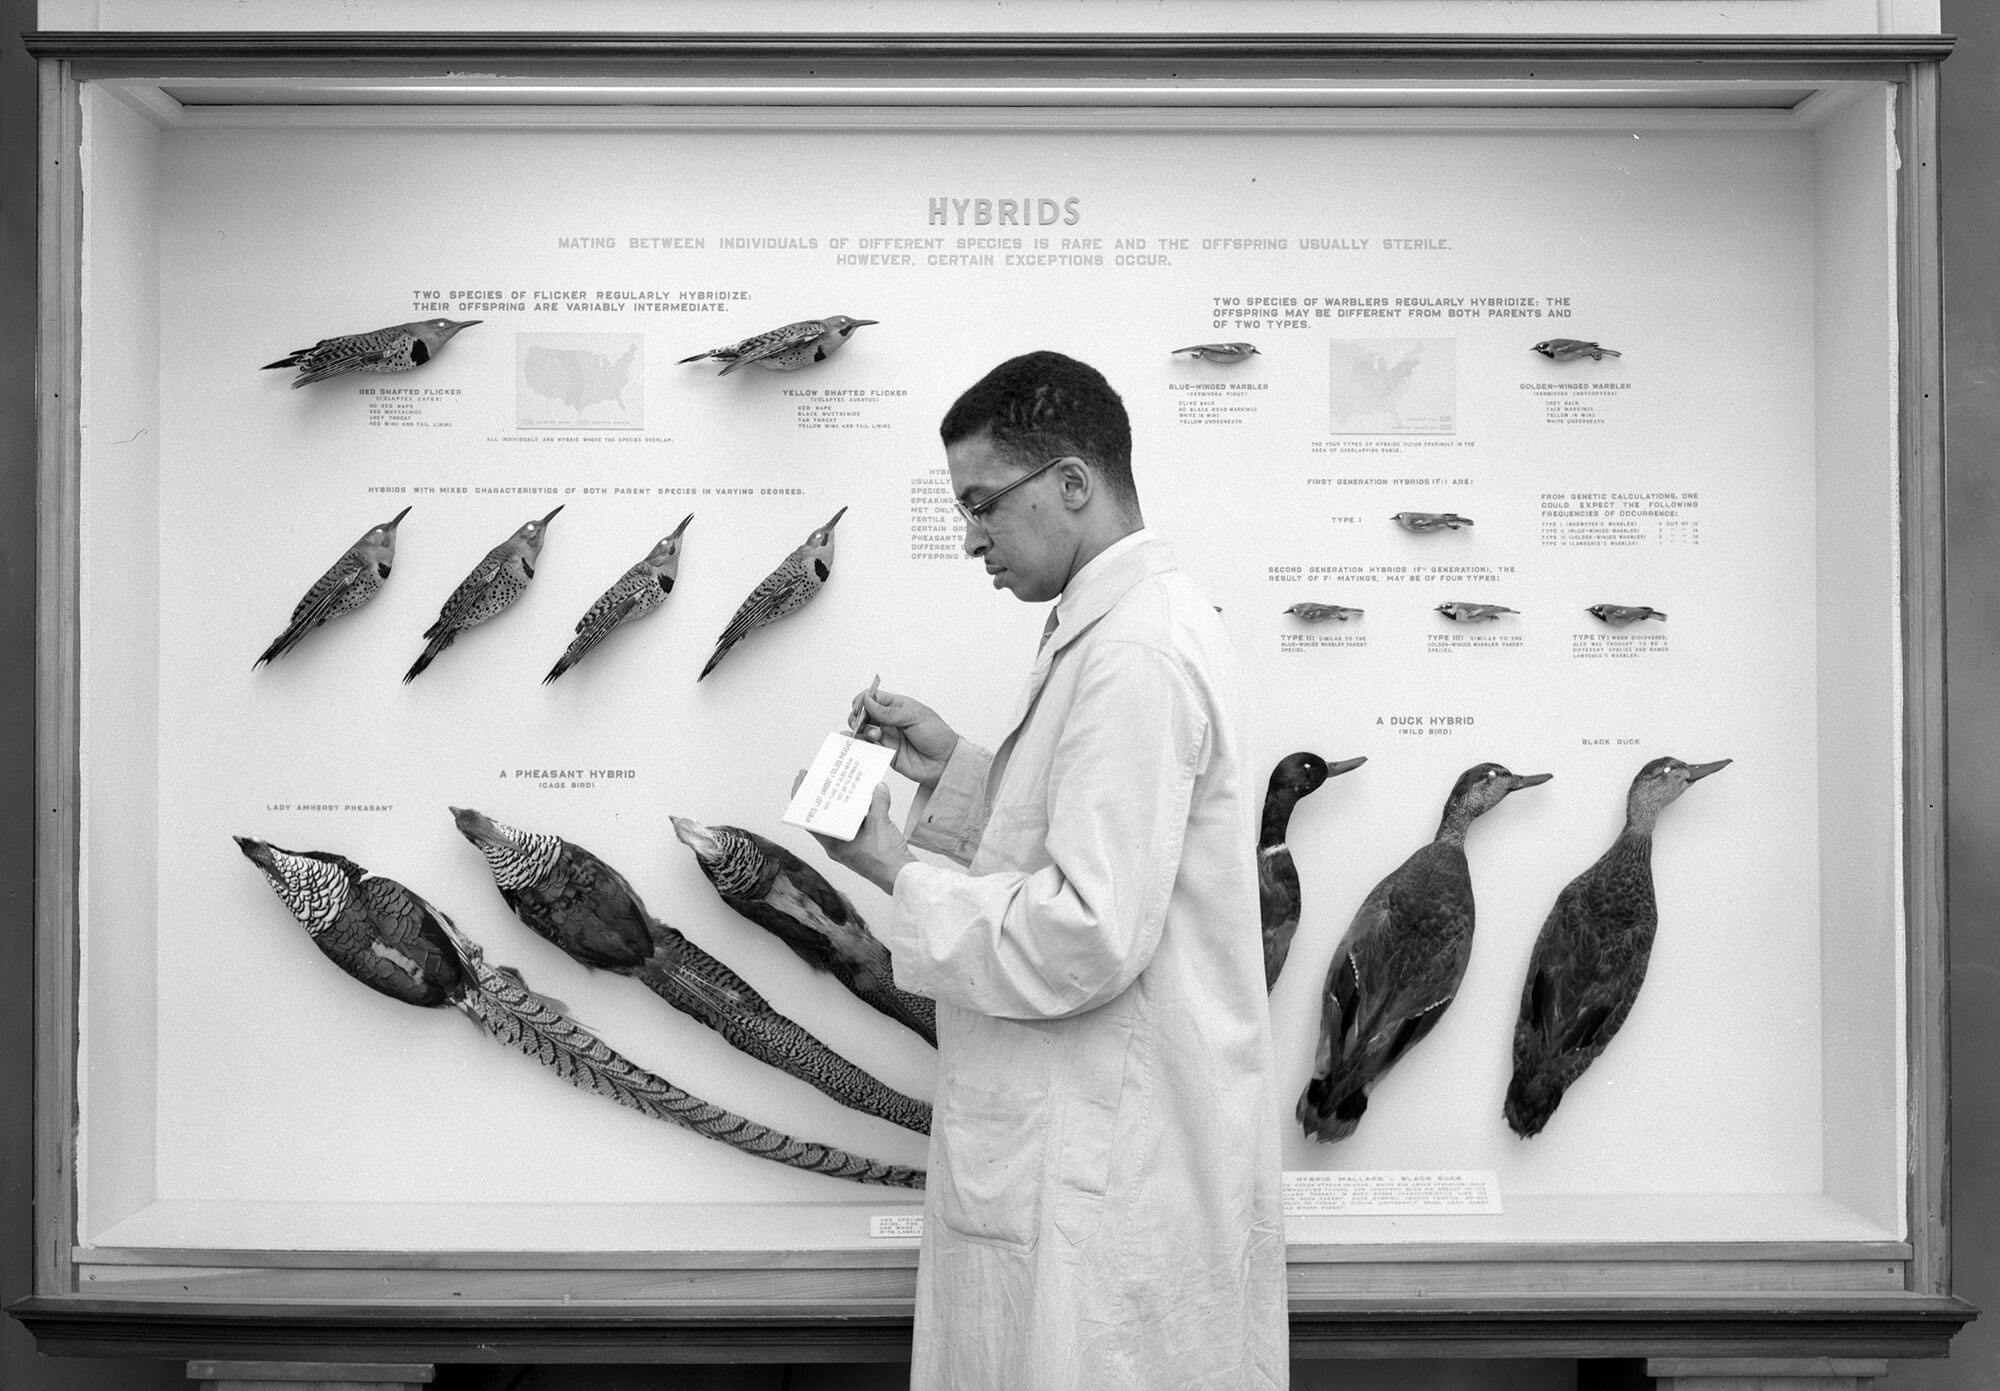 Carl Cotton, wearing a lab coat, stands in front of a display of bird specimens. He looks down at a card he’s holding in his hand.